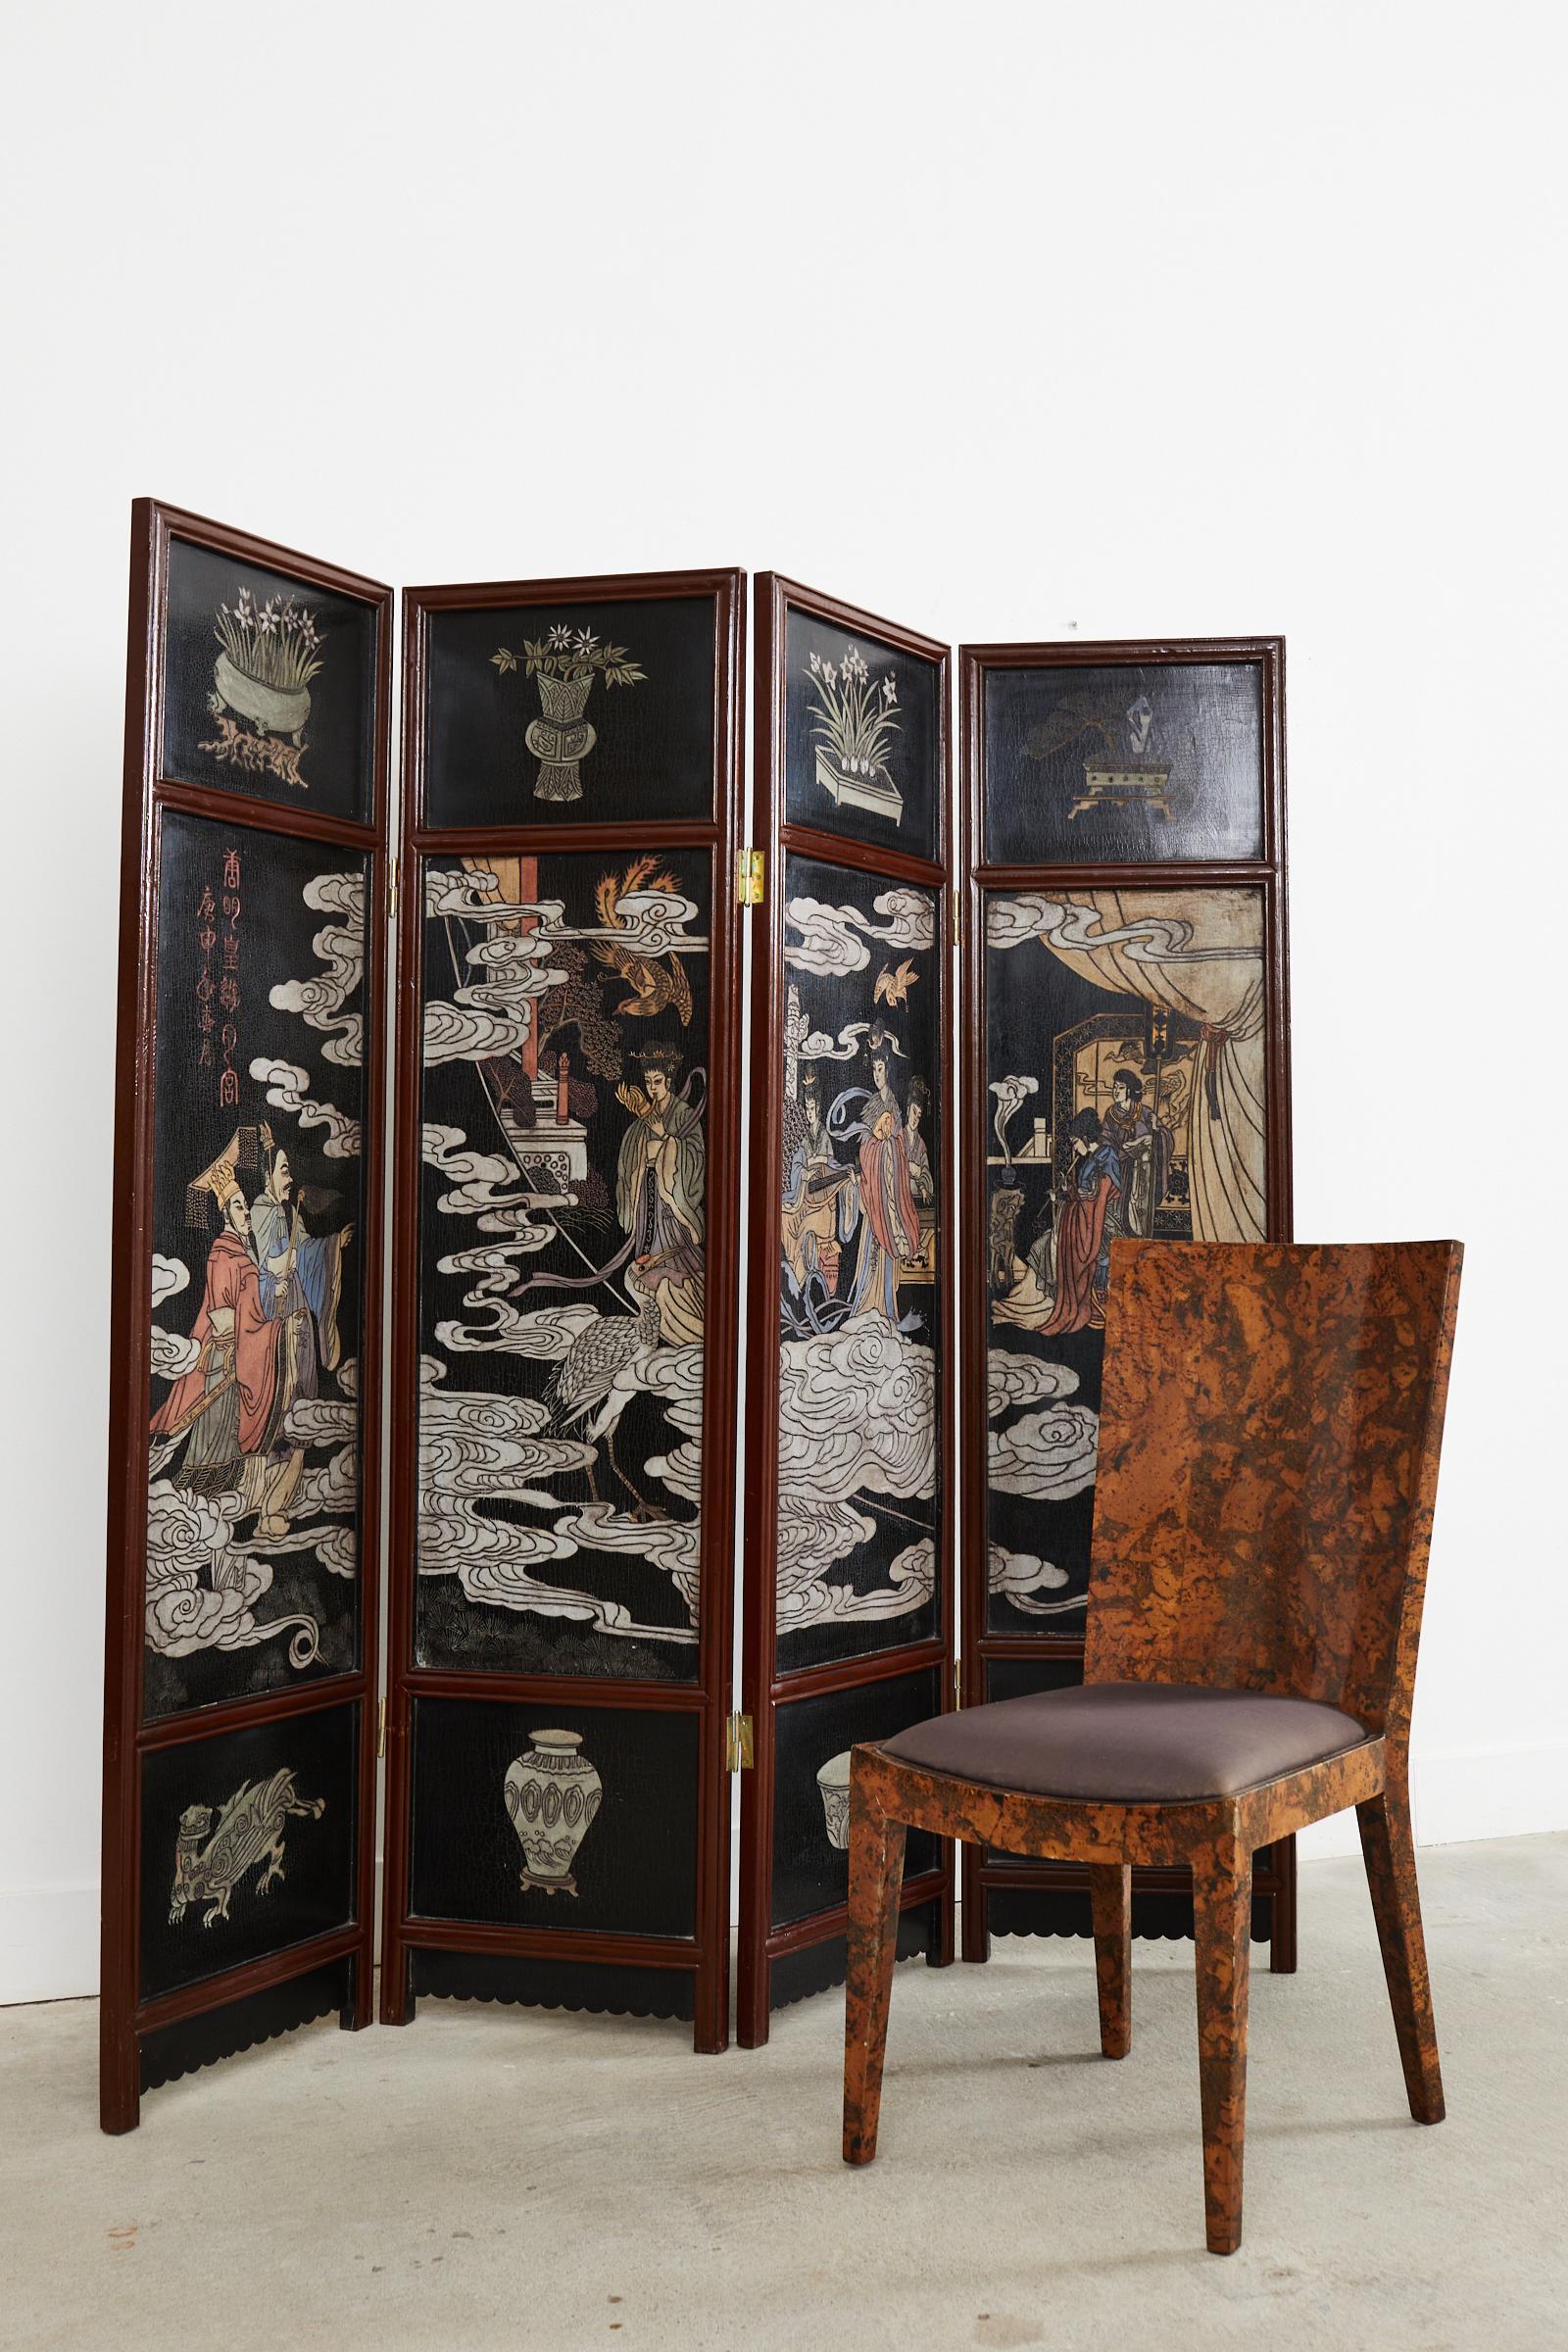 Celestial Chinese export coromandel four-panel screen depicting figures in colorful robes in a heavenly landscape among the white clouds. Each scene is bordered on top and bottom with scholars objects in windows having oxblood red trim. The reverse